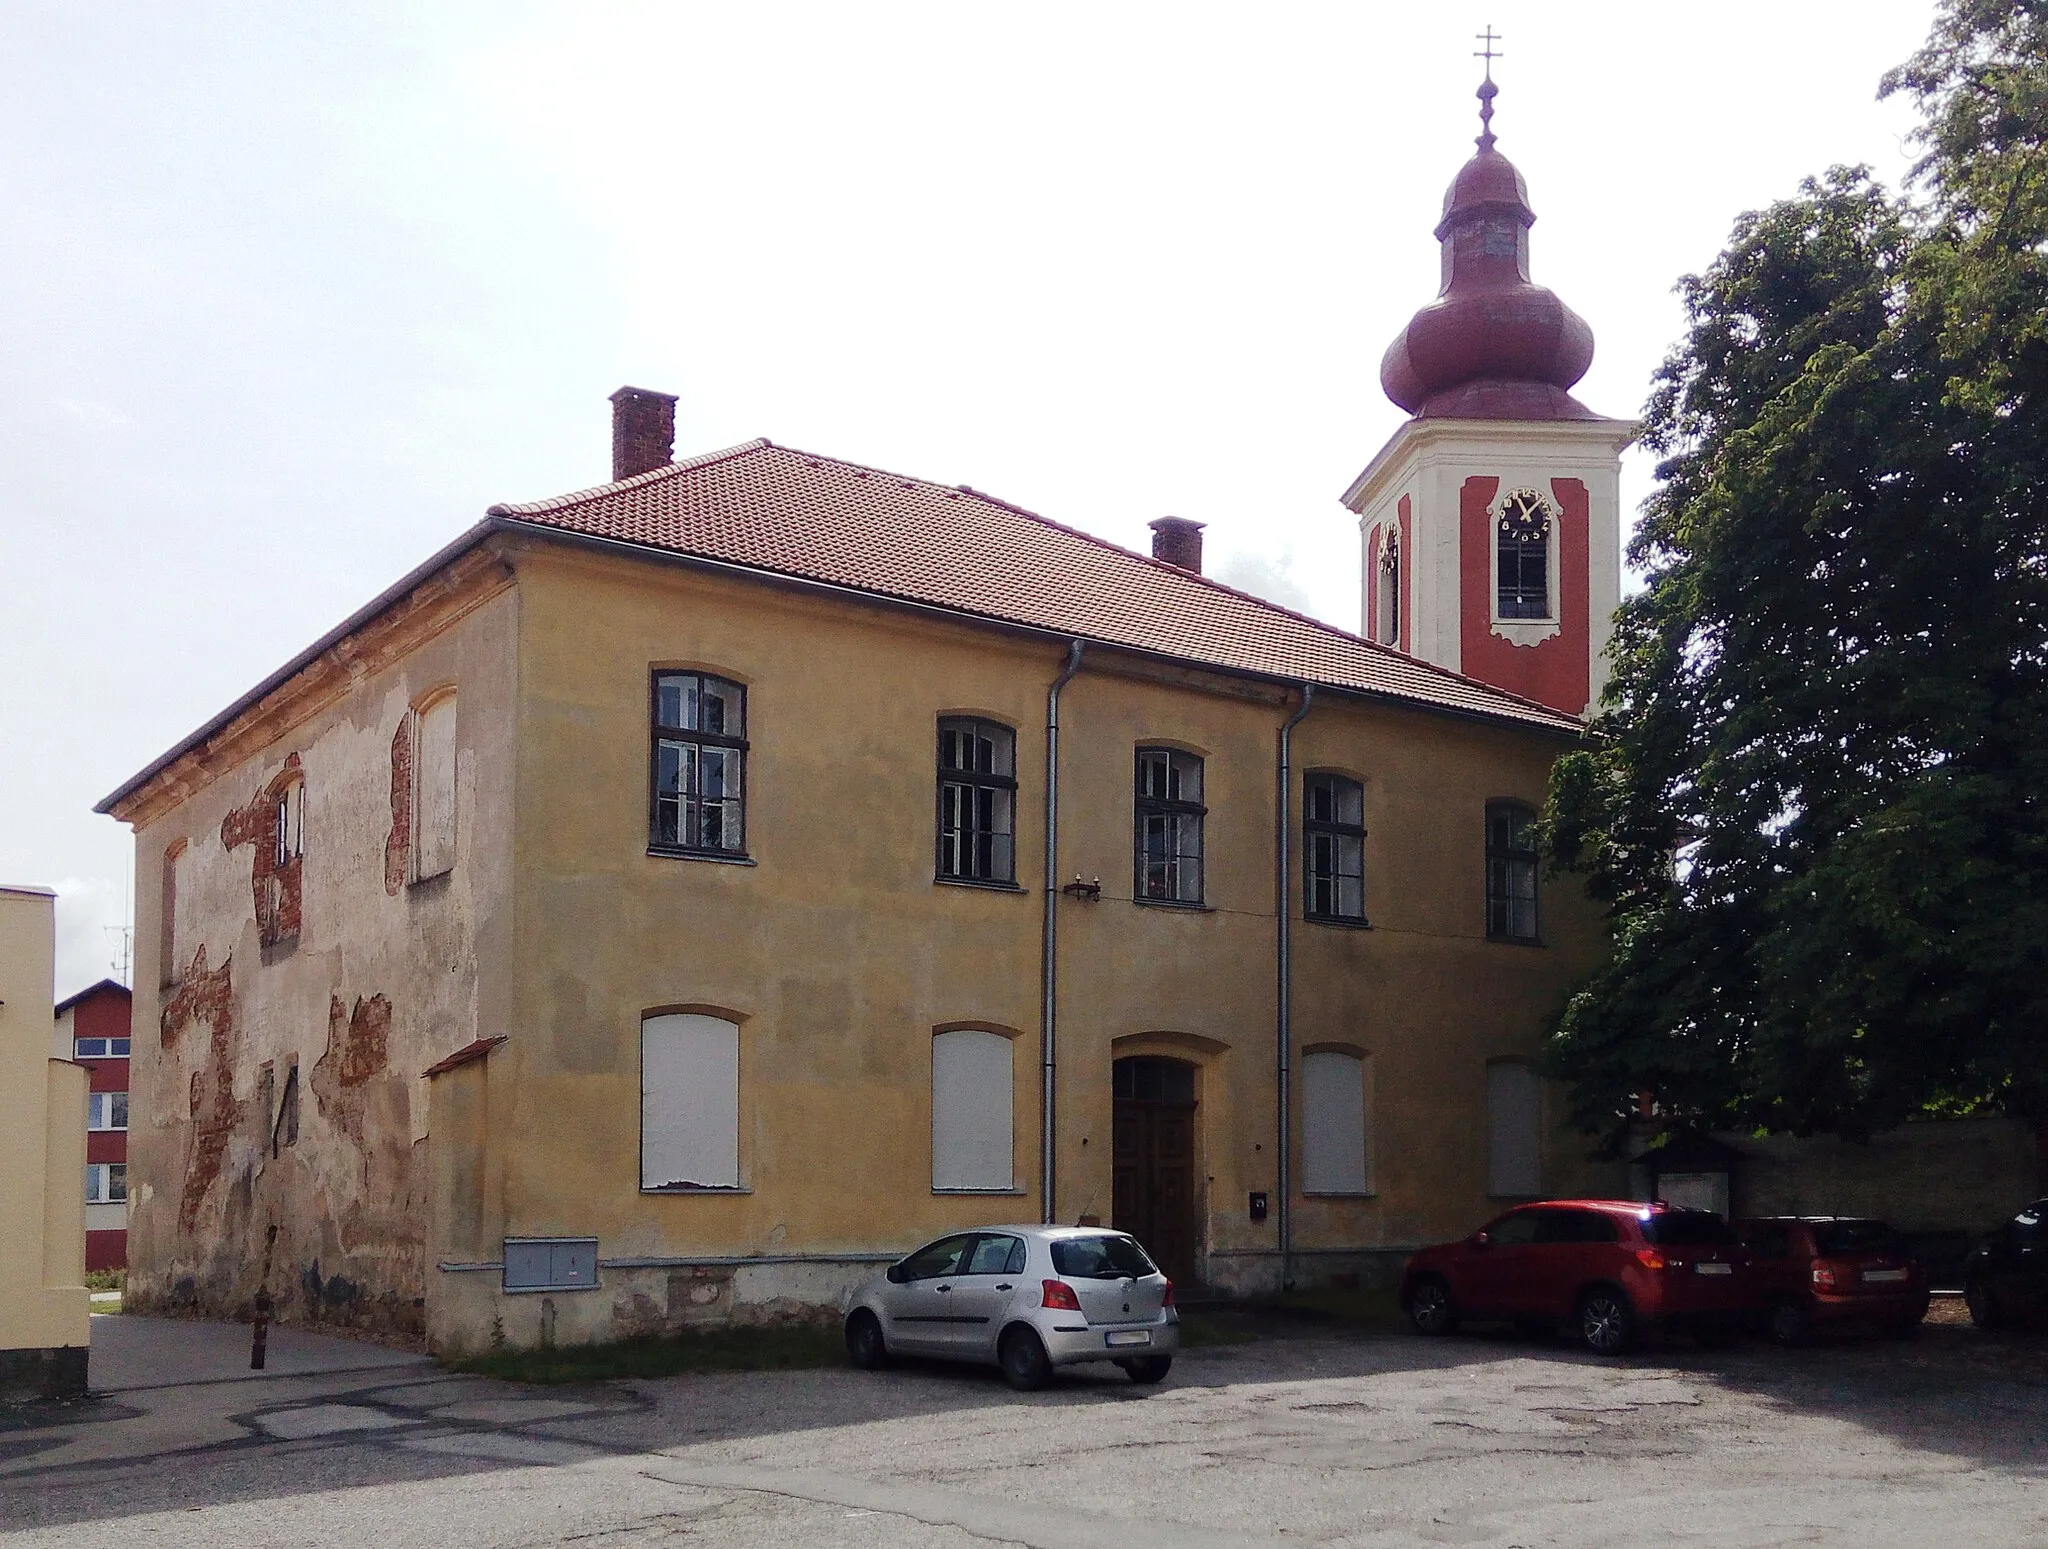 Photo showing: House No 1, the local rectory in the village of Malšice, Tábor District, South Bohemian Region, Czechia